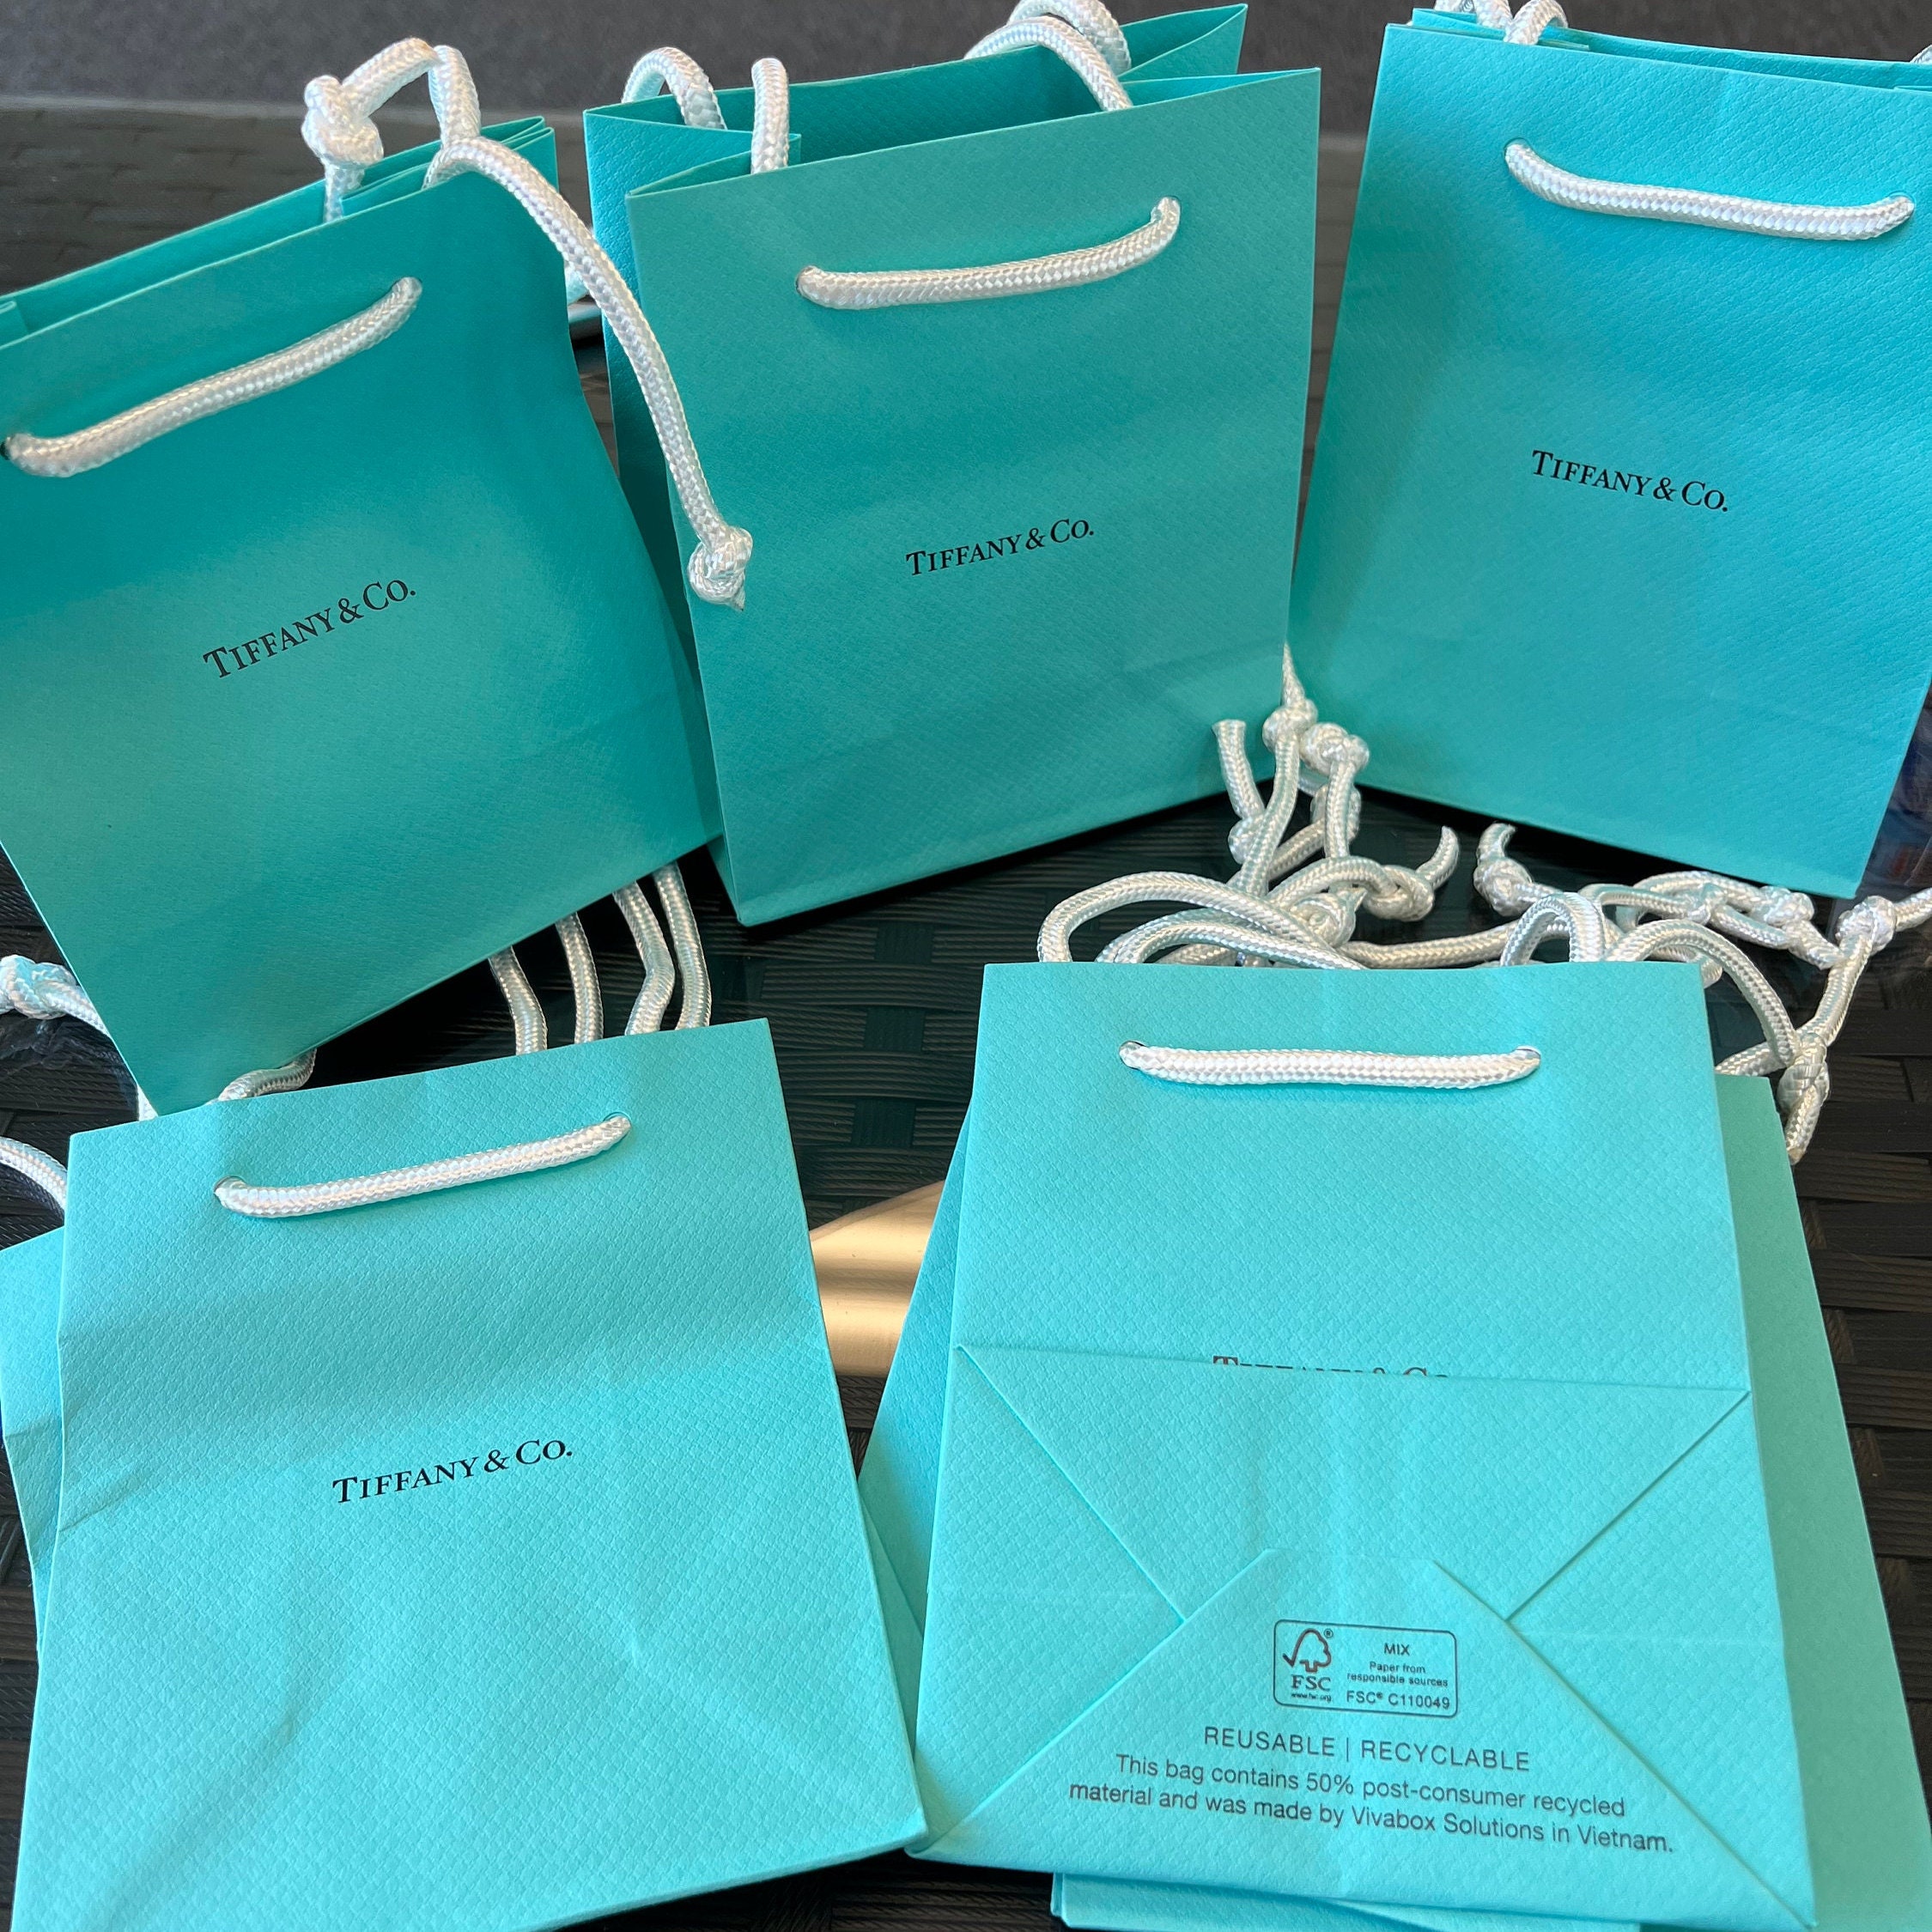 Authentic Tiffany & Co. Turquoise Blue Paper Shopping Bag Gift Bag Brand New